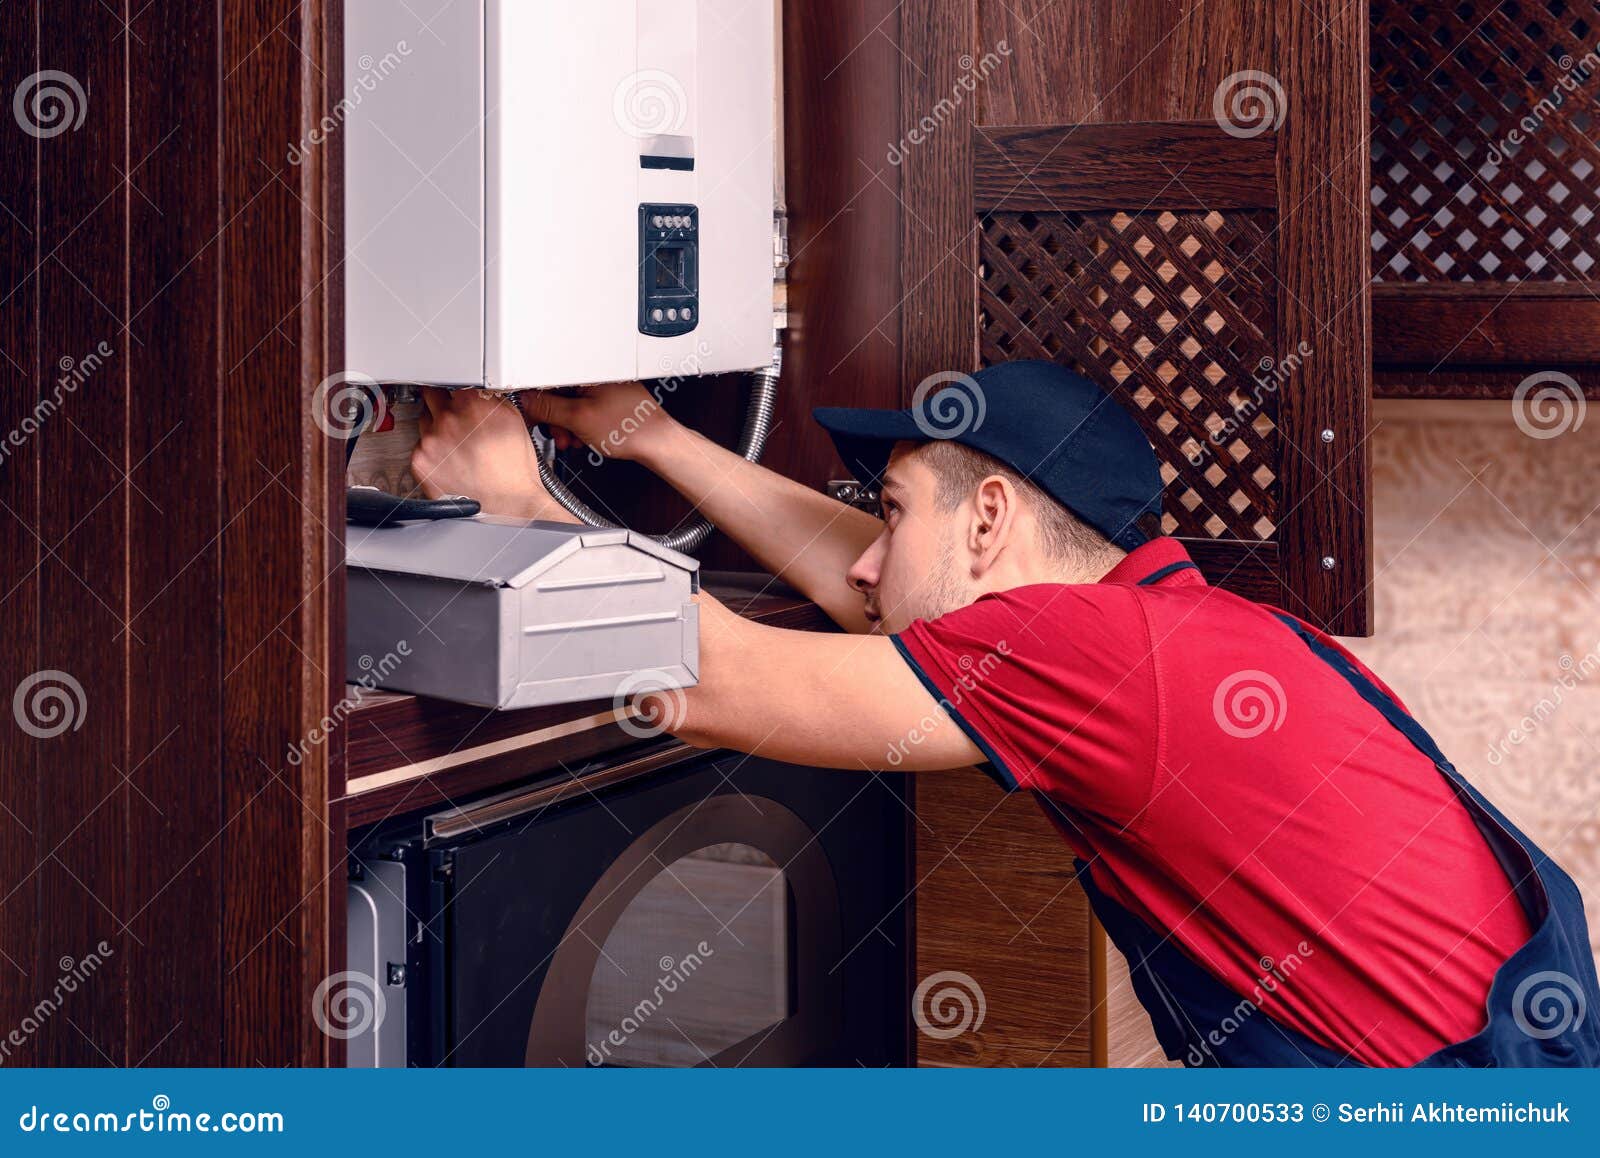 a young skilled worker regulates the gas boiler before use